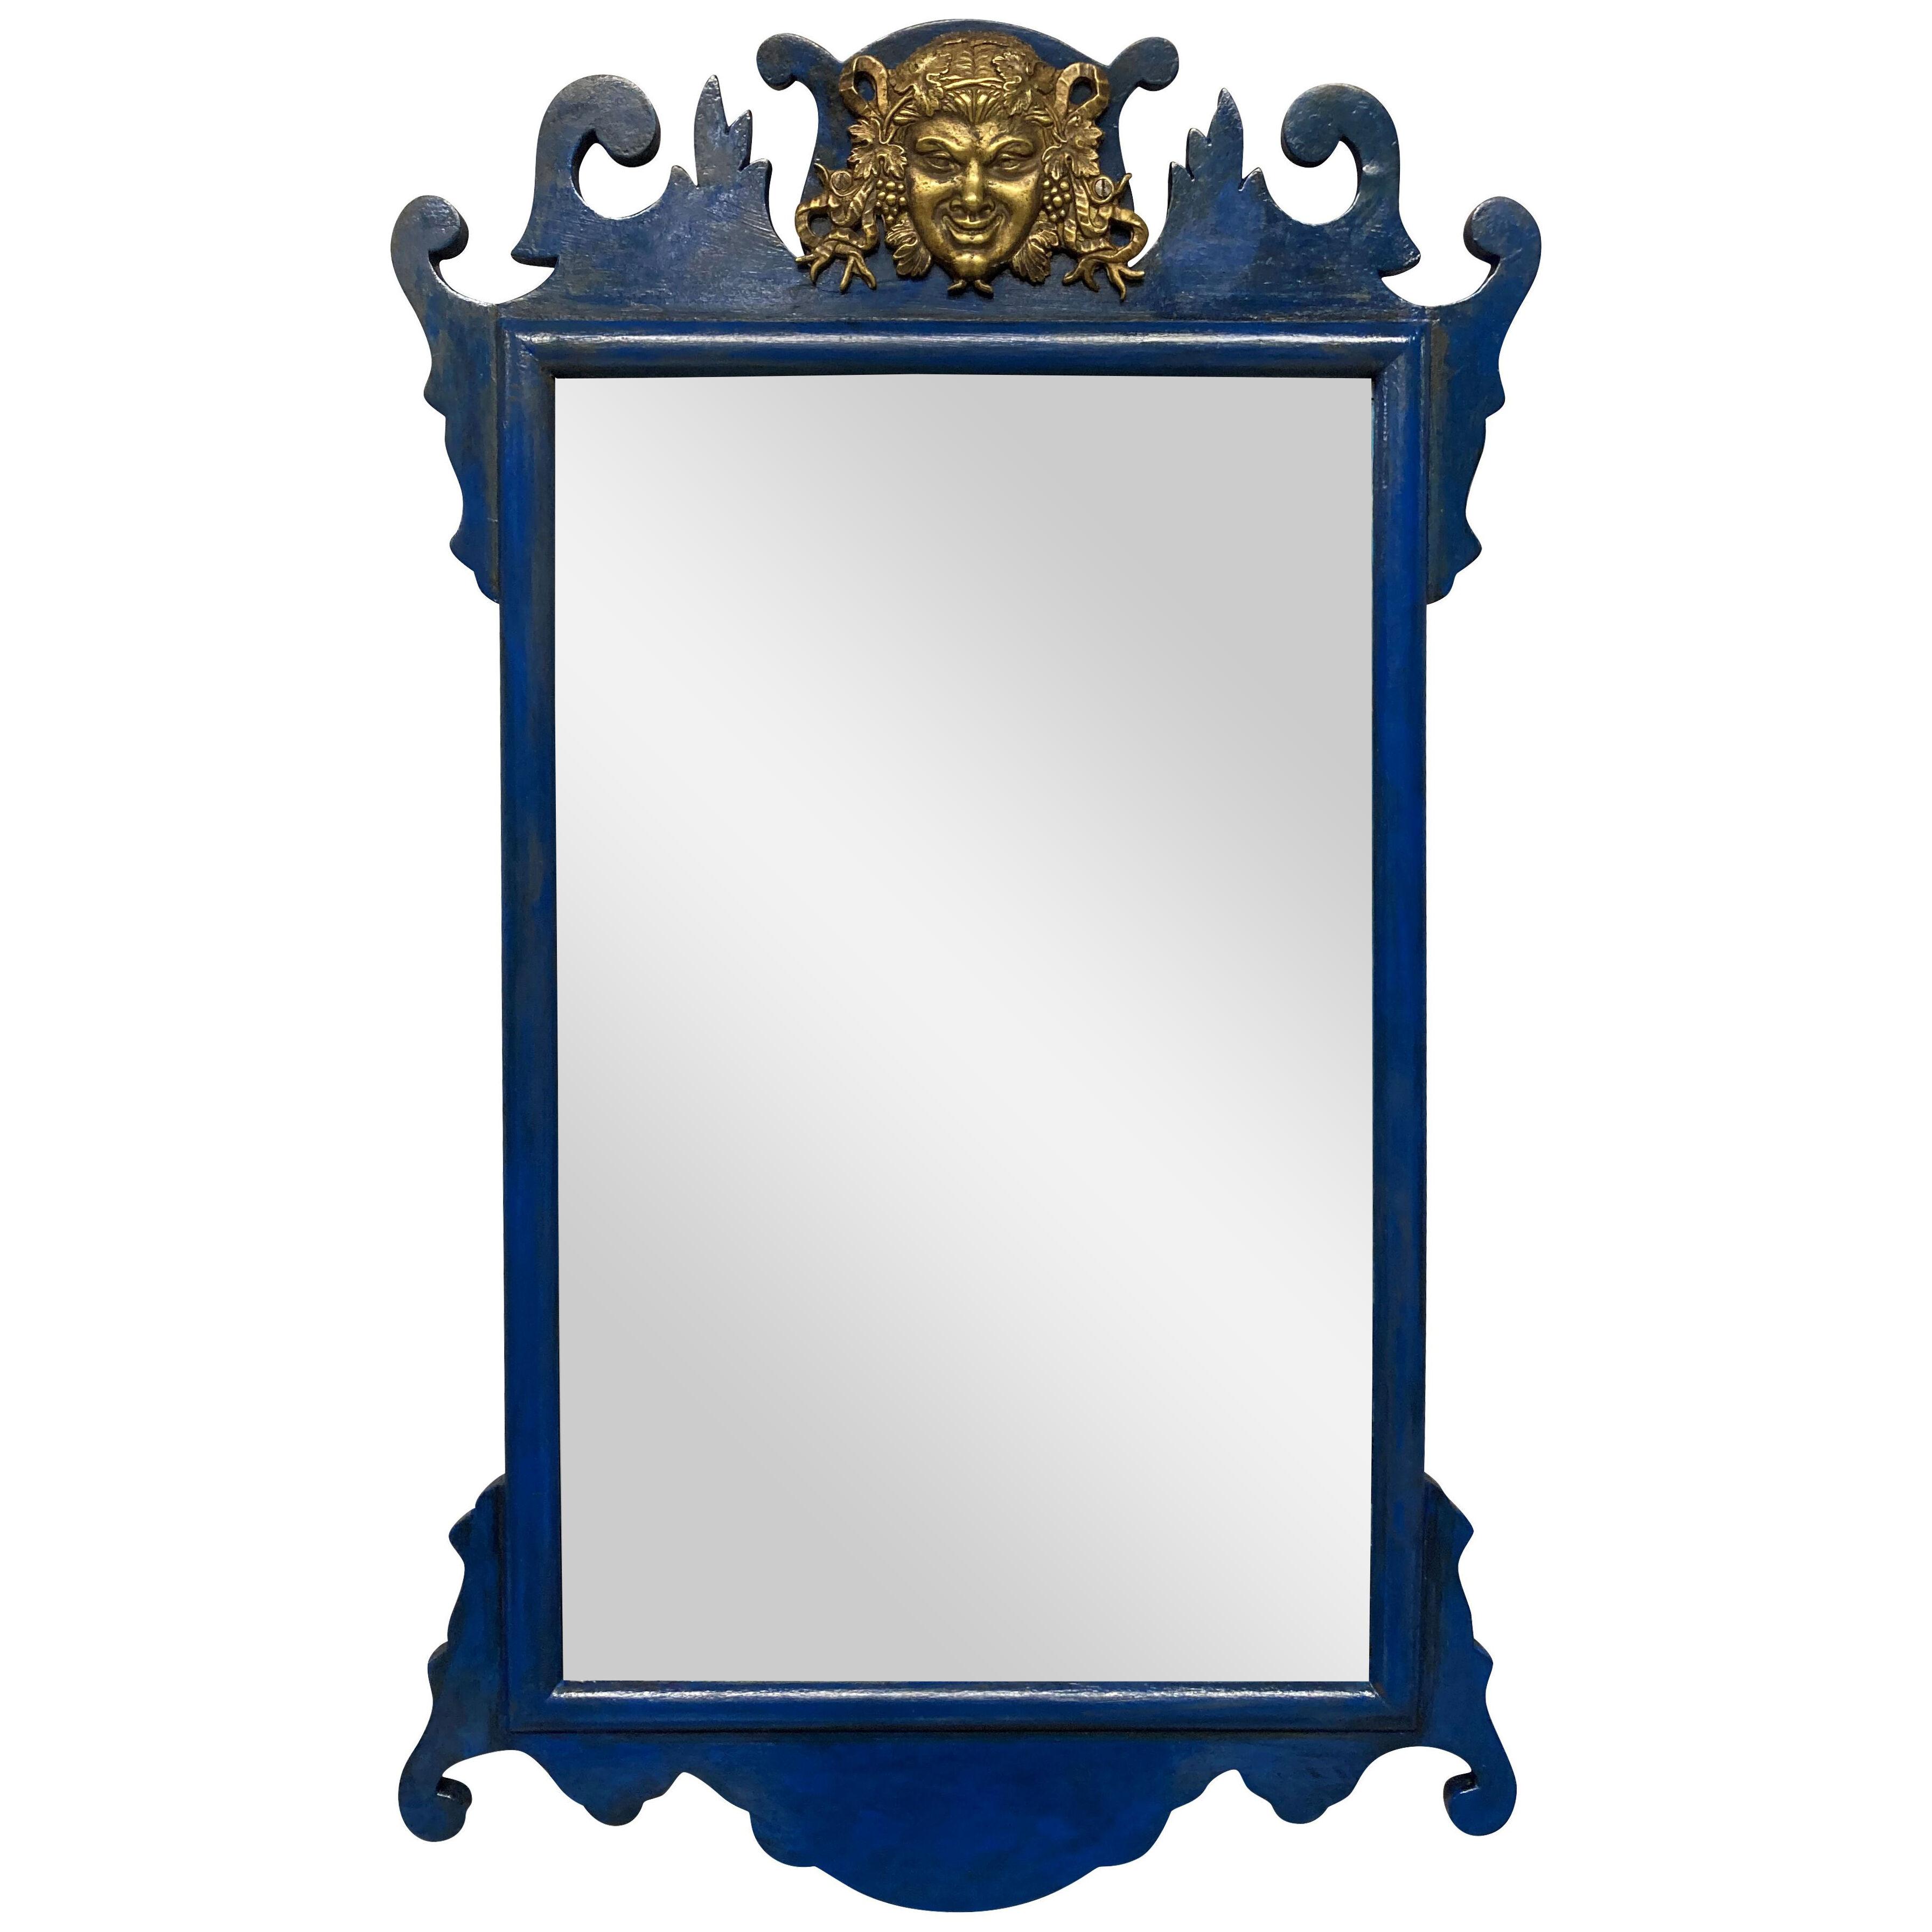 A CHARMING BLUE LACQUERED TOILET MIRROR FEATURING DIONYSUS